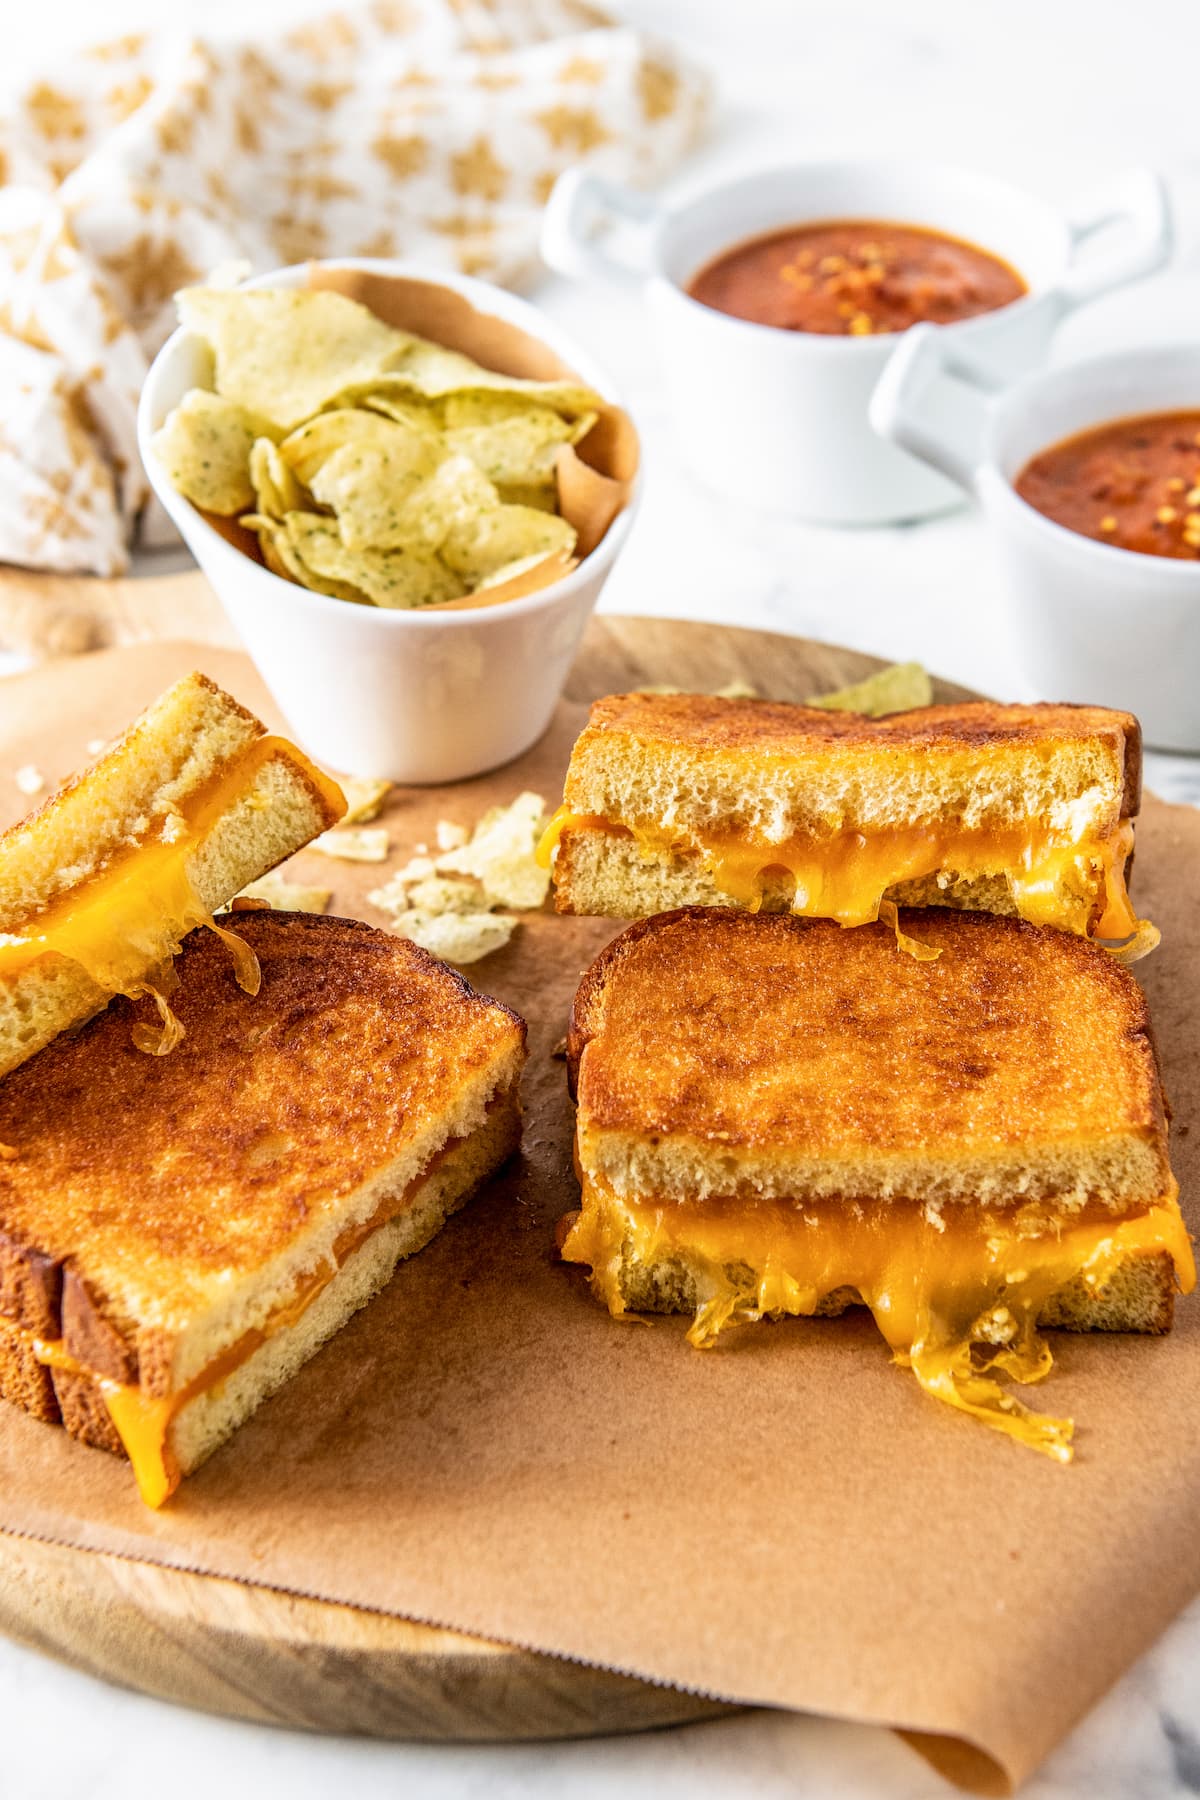 two grilled cheese sandwiches cut in half on a wooden platter with a side of potato chips